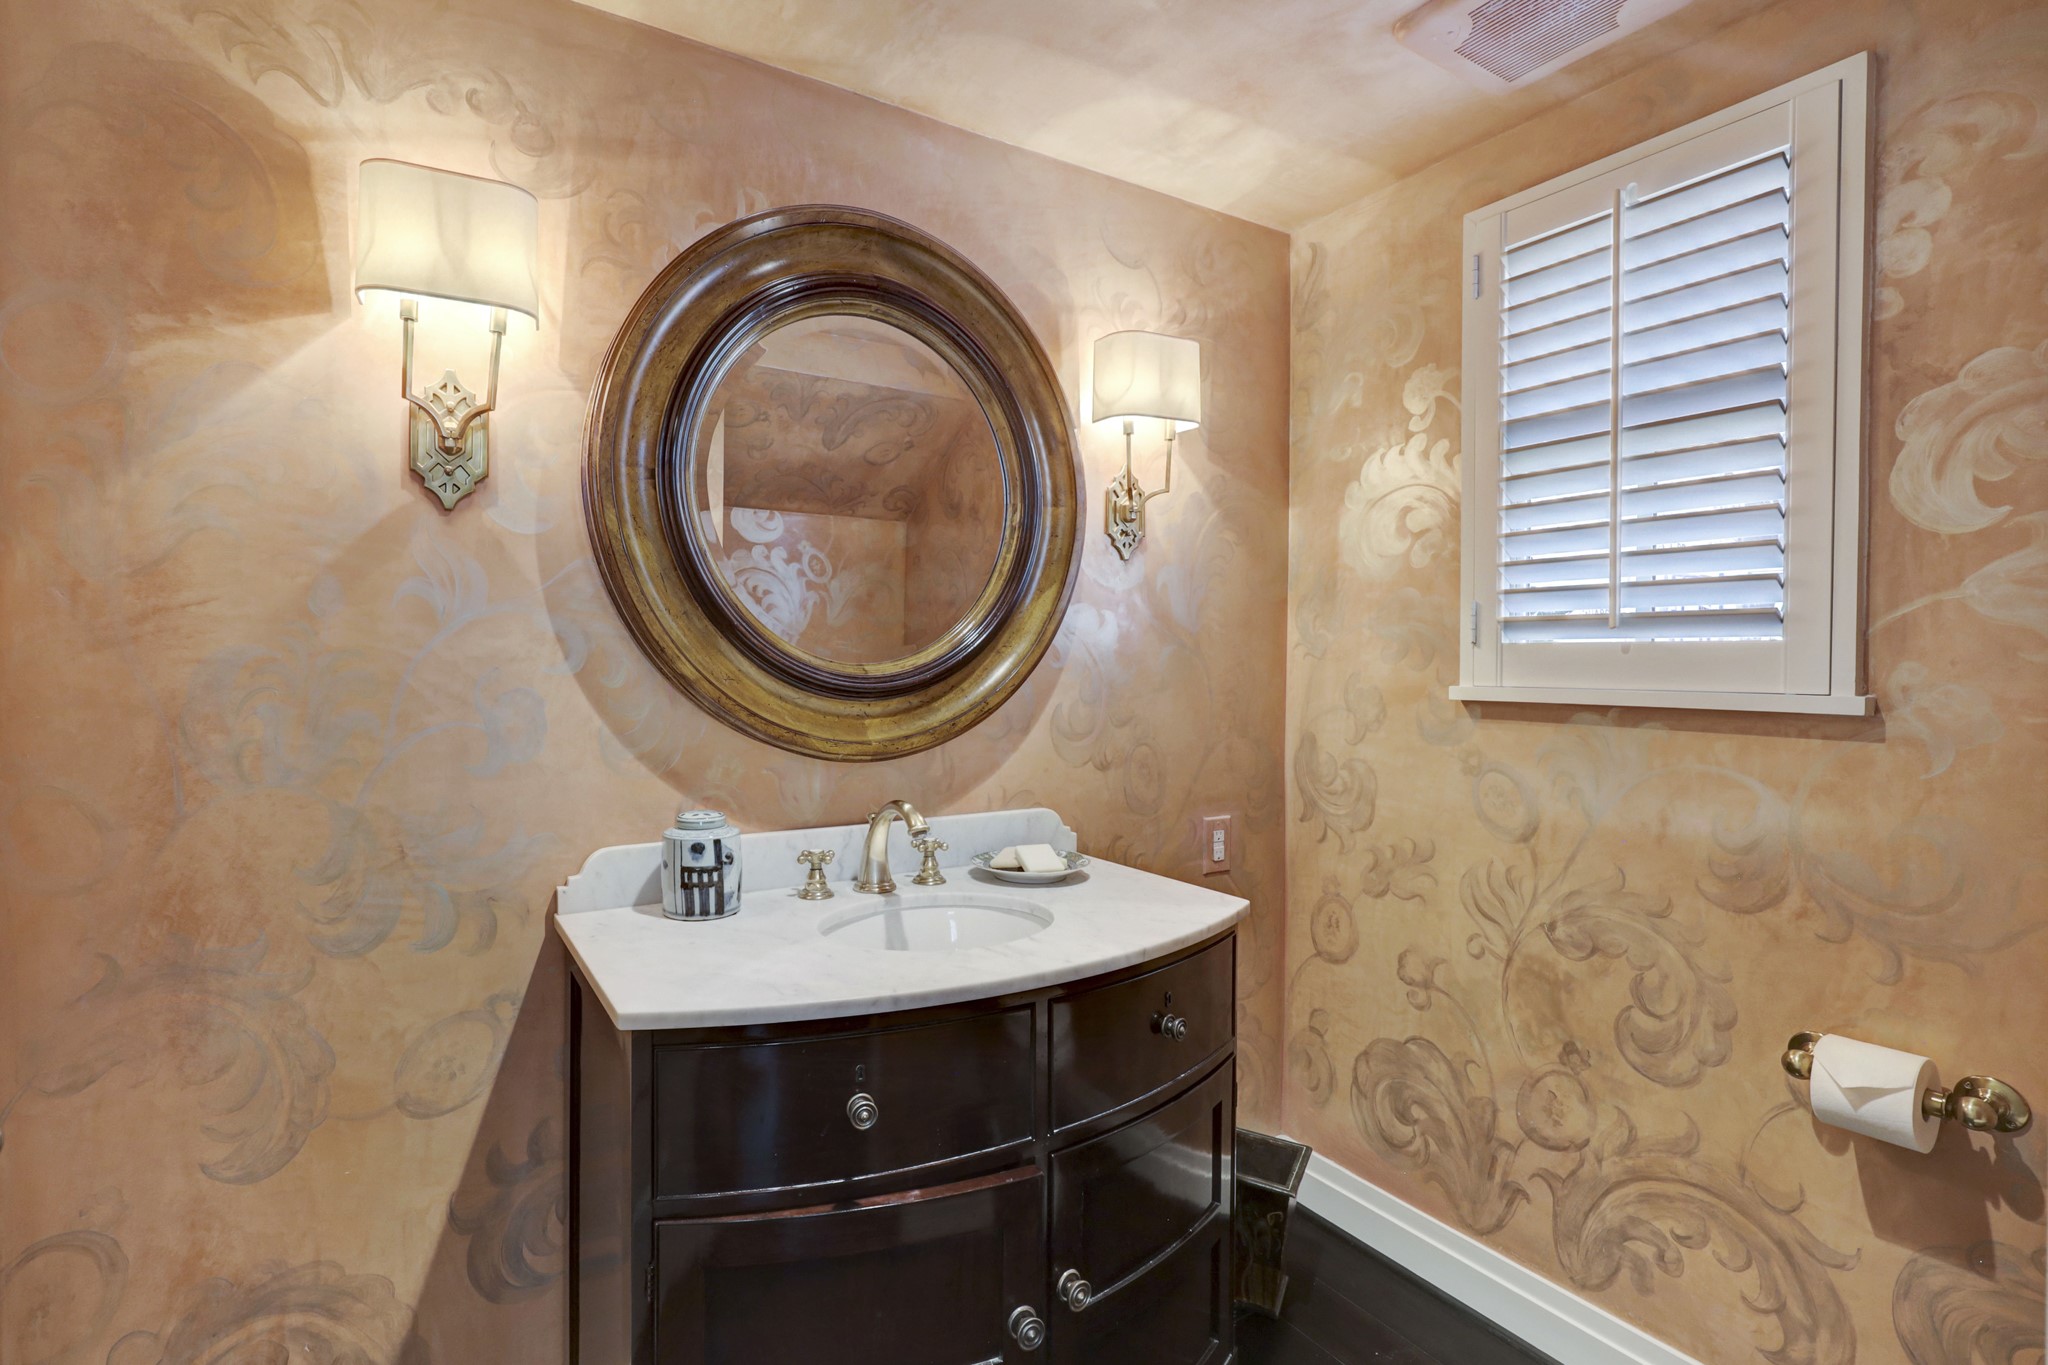 Powder Room with Segreto finishes, well located just off foyer.